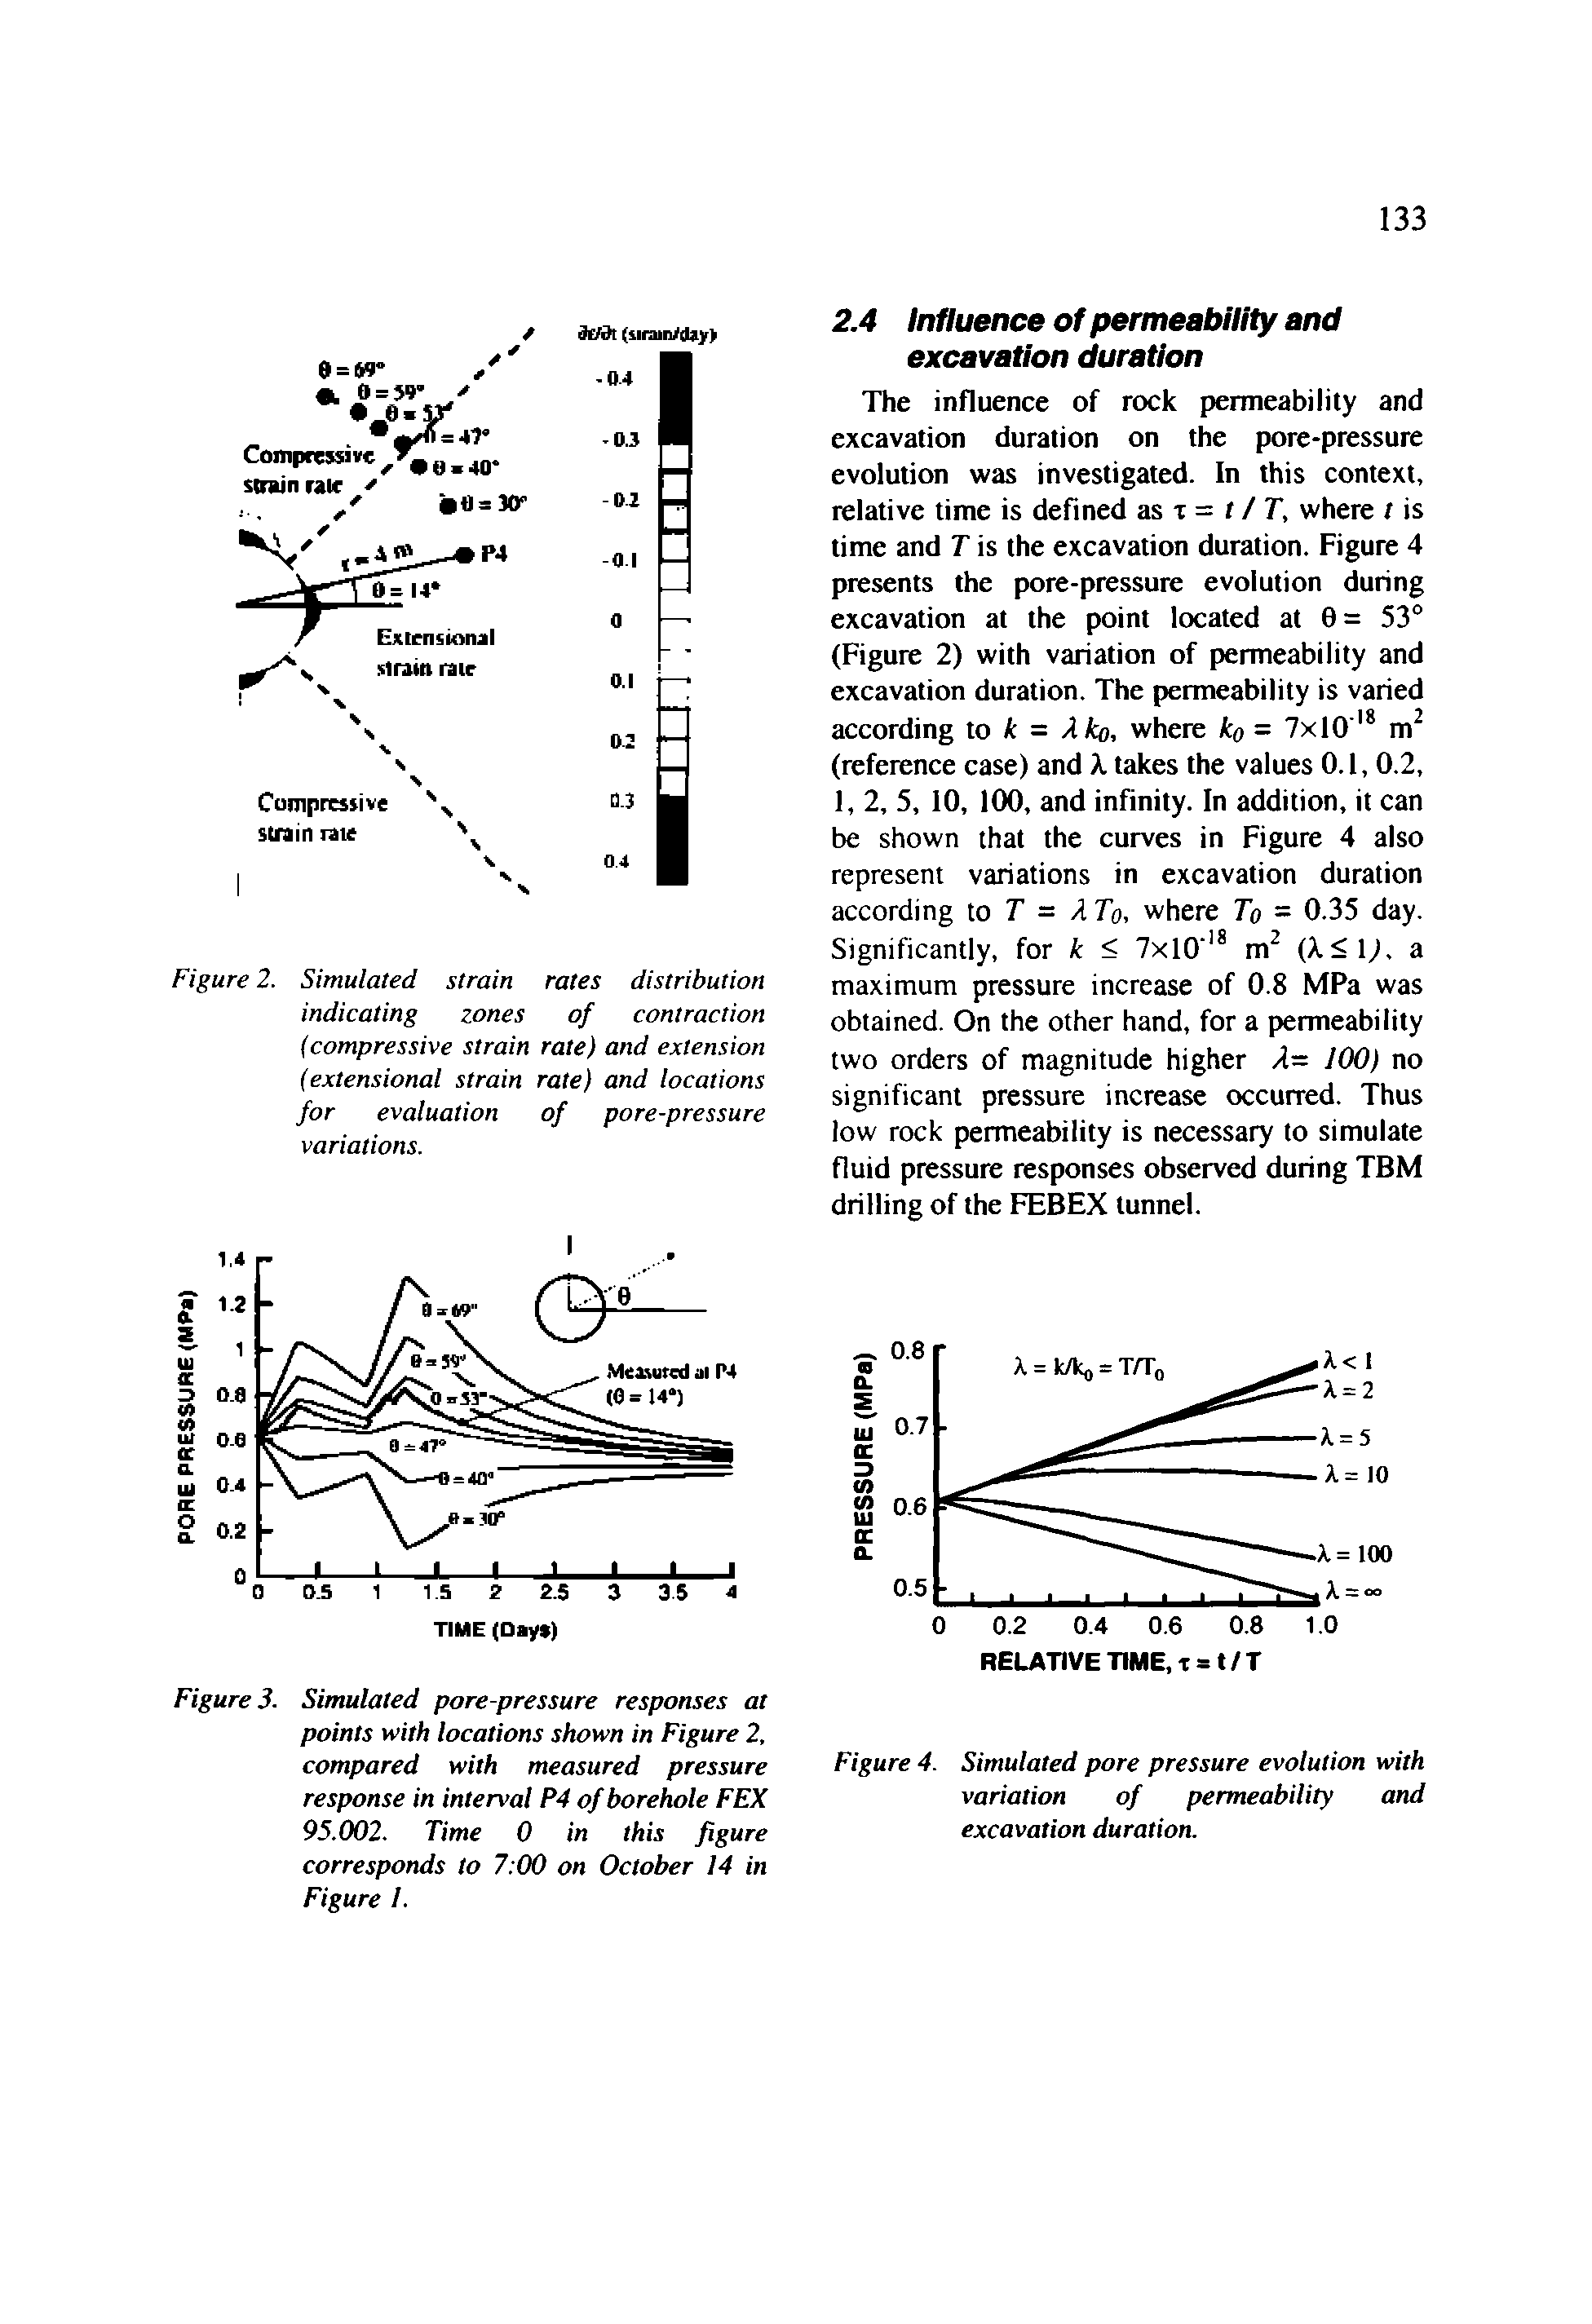 Figure 2. Simulated strain rates distribution indicating zones of contraction (compressive strain rate) and extension (extensional strain rate) and locations for evaluation of pore-pressure variations.